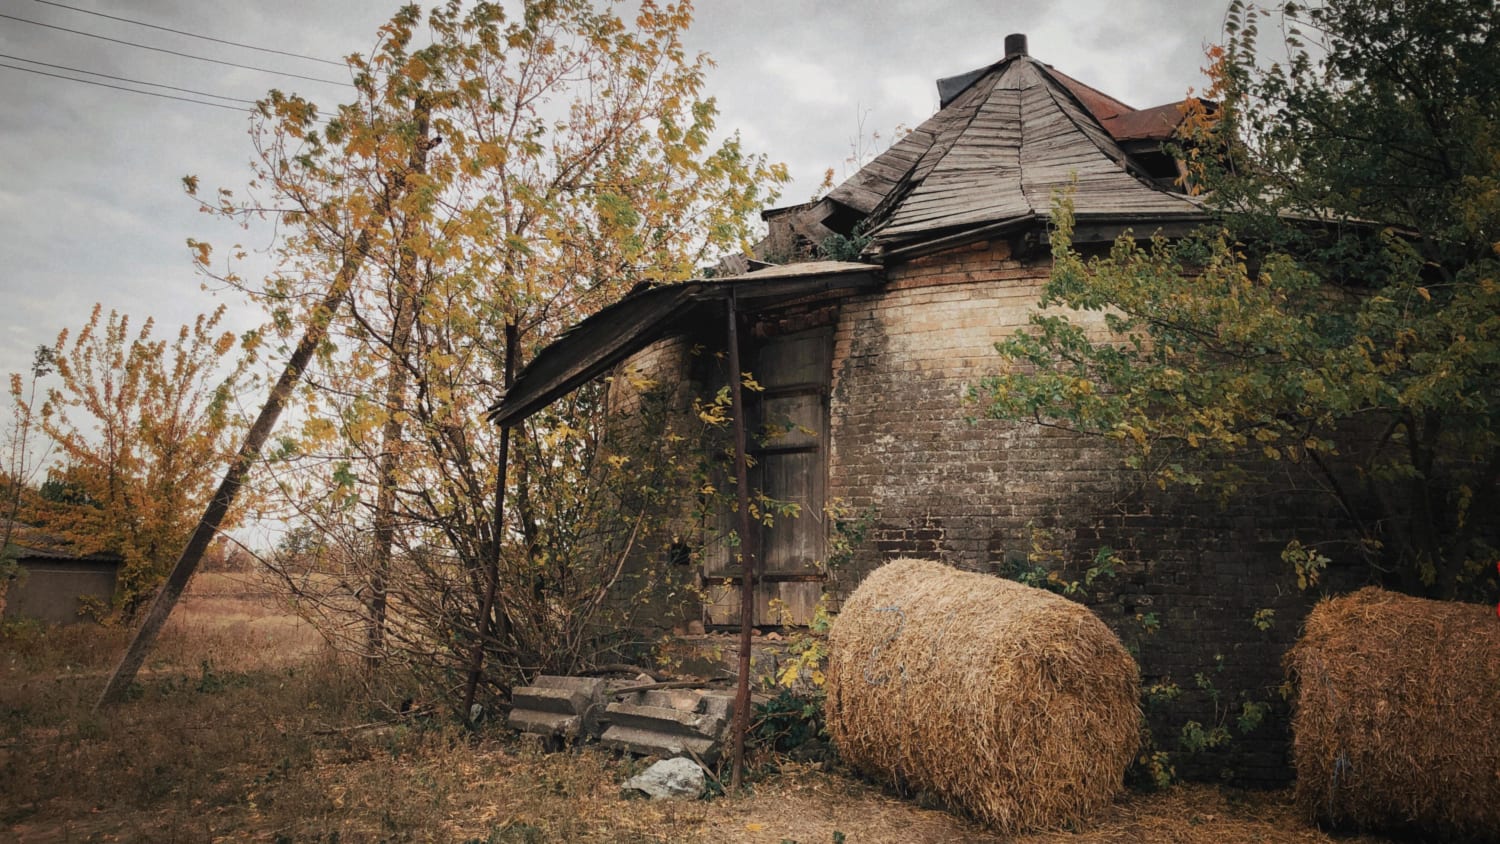 It's not Hagrid's hut but an abandoned wind mill built by Germans in southern Ukraine. It used to be 3 storey with huge wings but only the first floor survived.